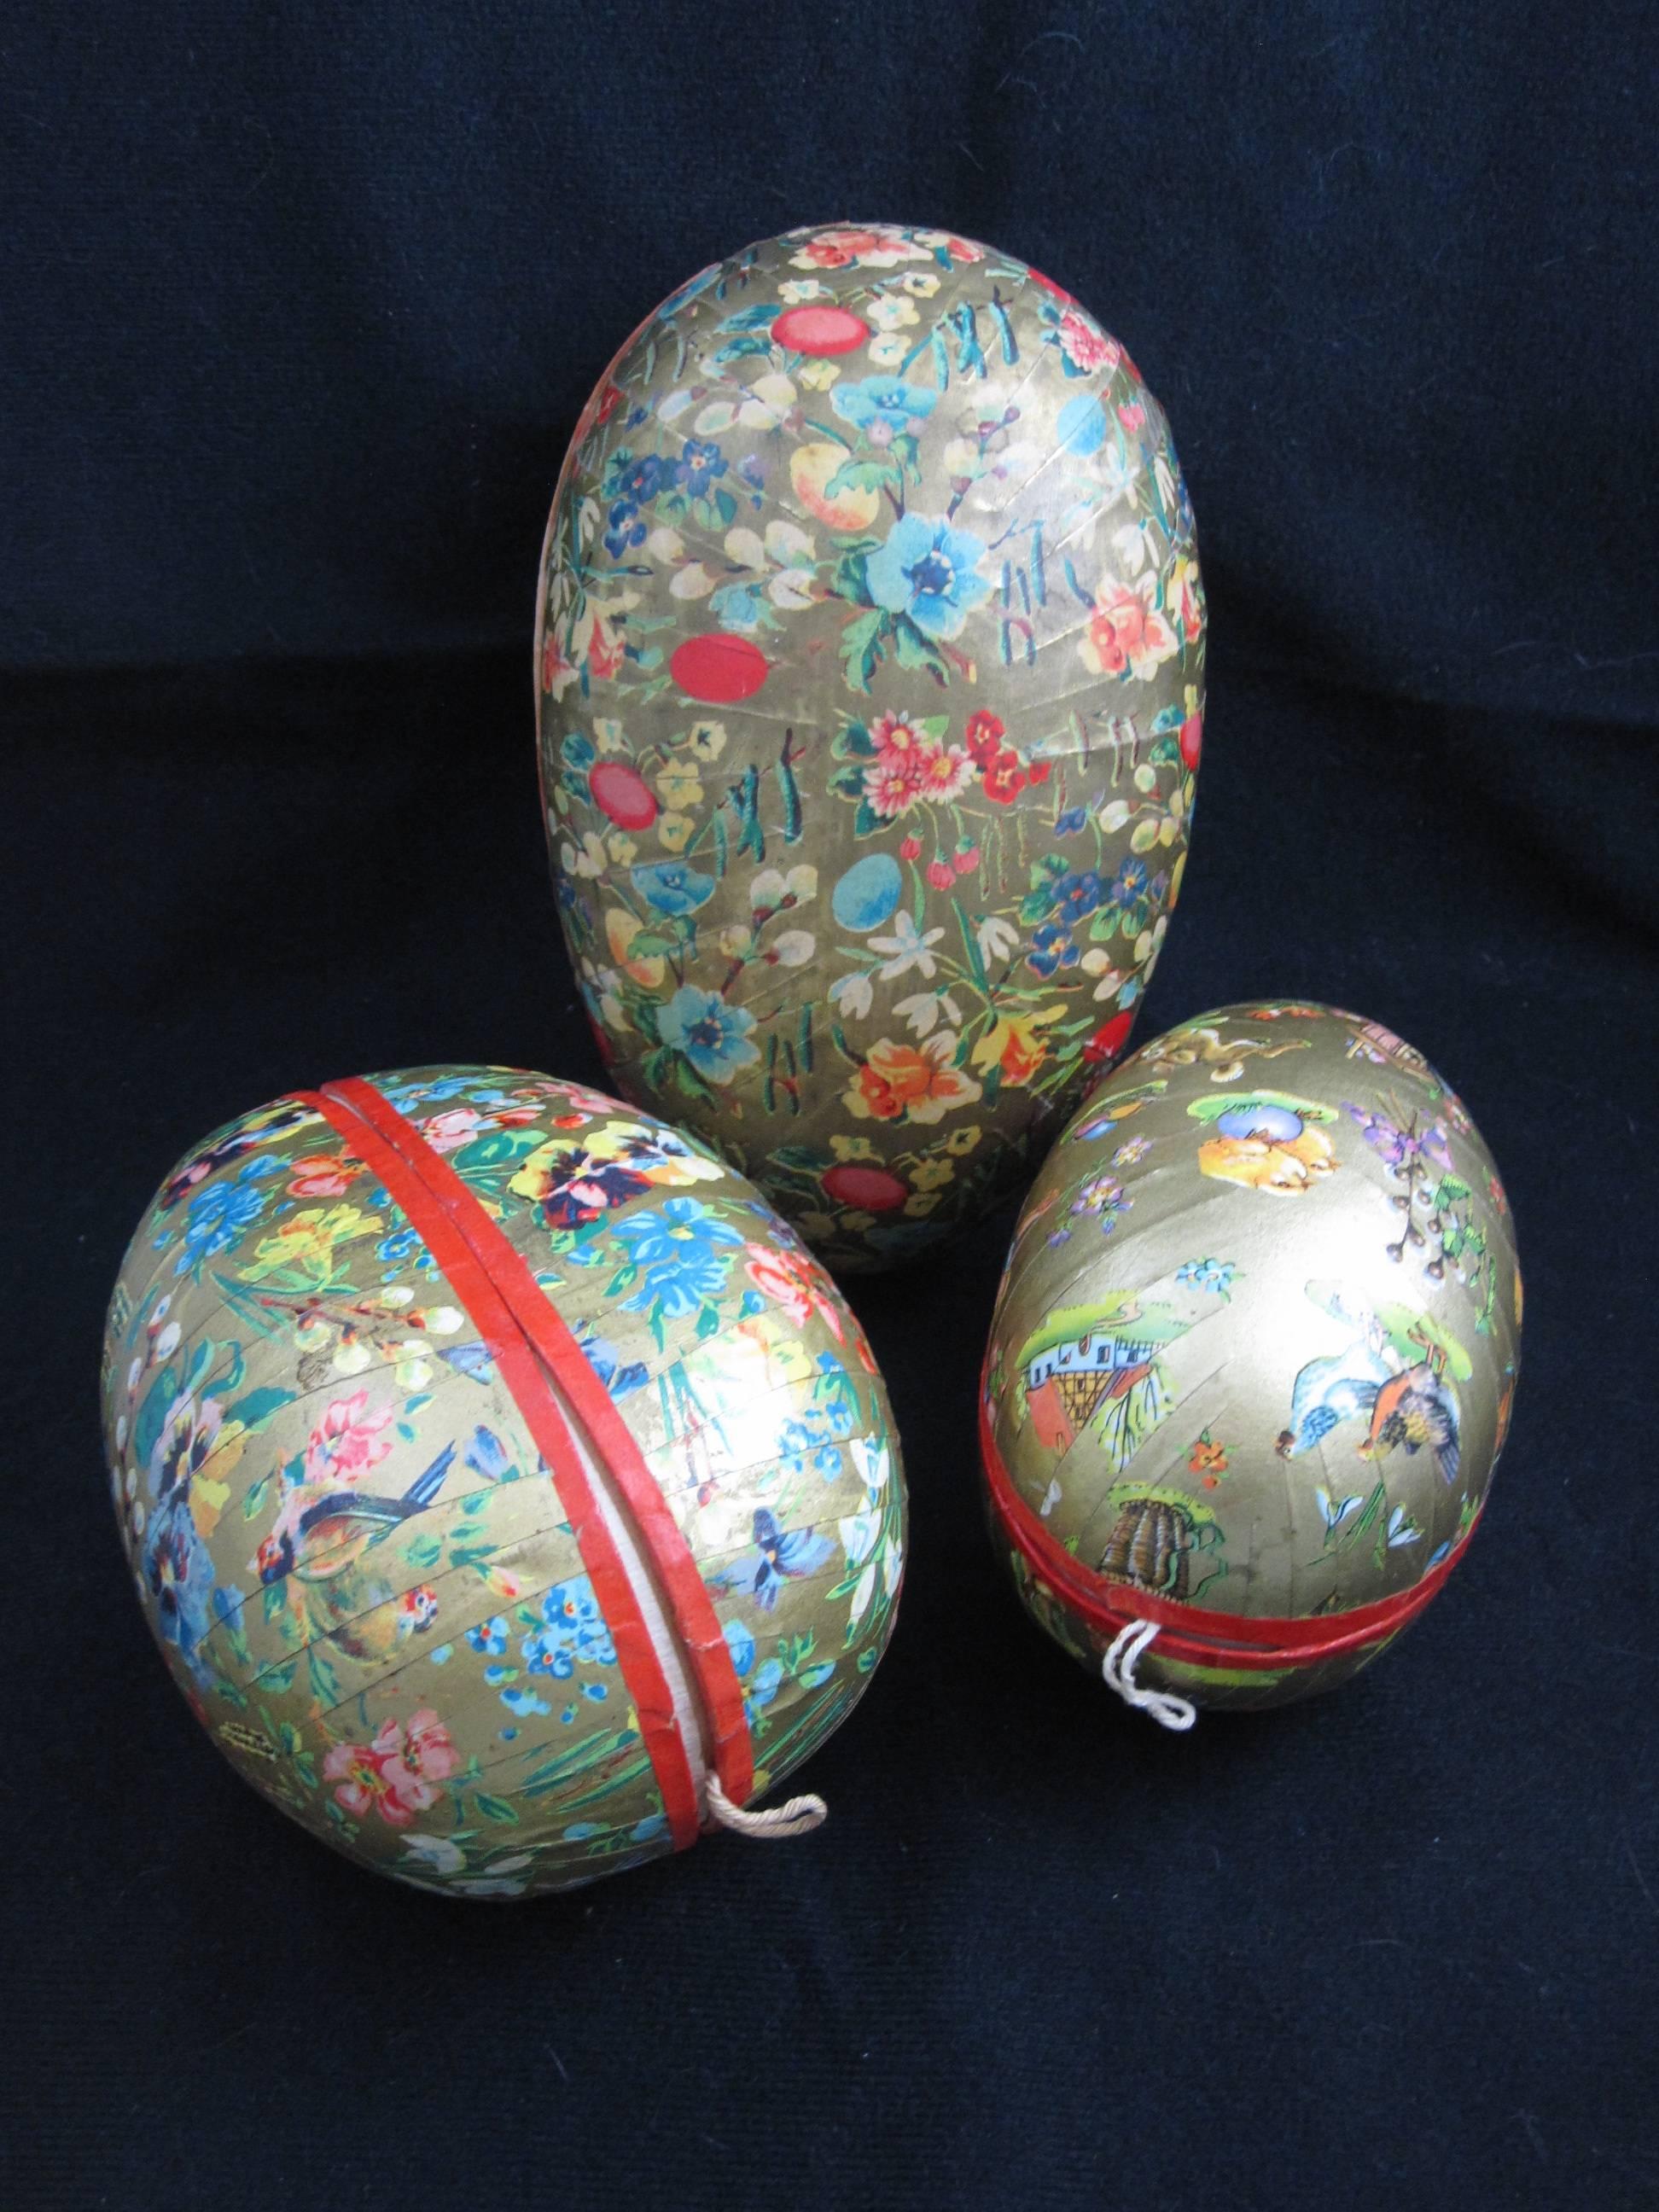 Popular during the Victorian era, this group of three German made papier-mâché egg-shaped Holiday candy containers or ornaments are covered with goldtone paper showing images of spring flowers, birds, bunnies, and children. 

Made to hang on a